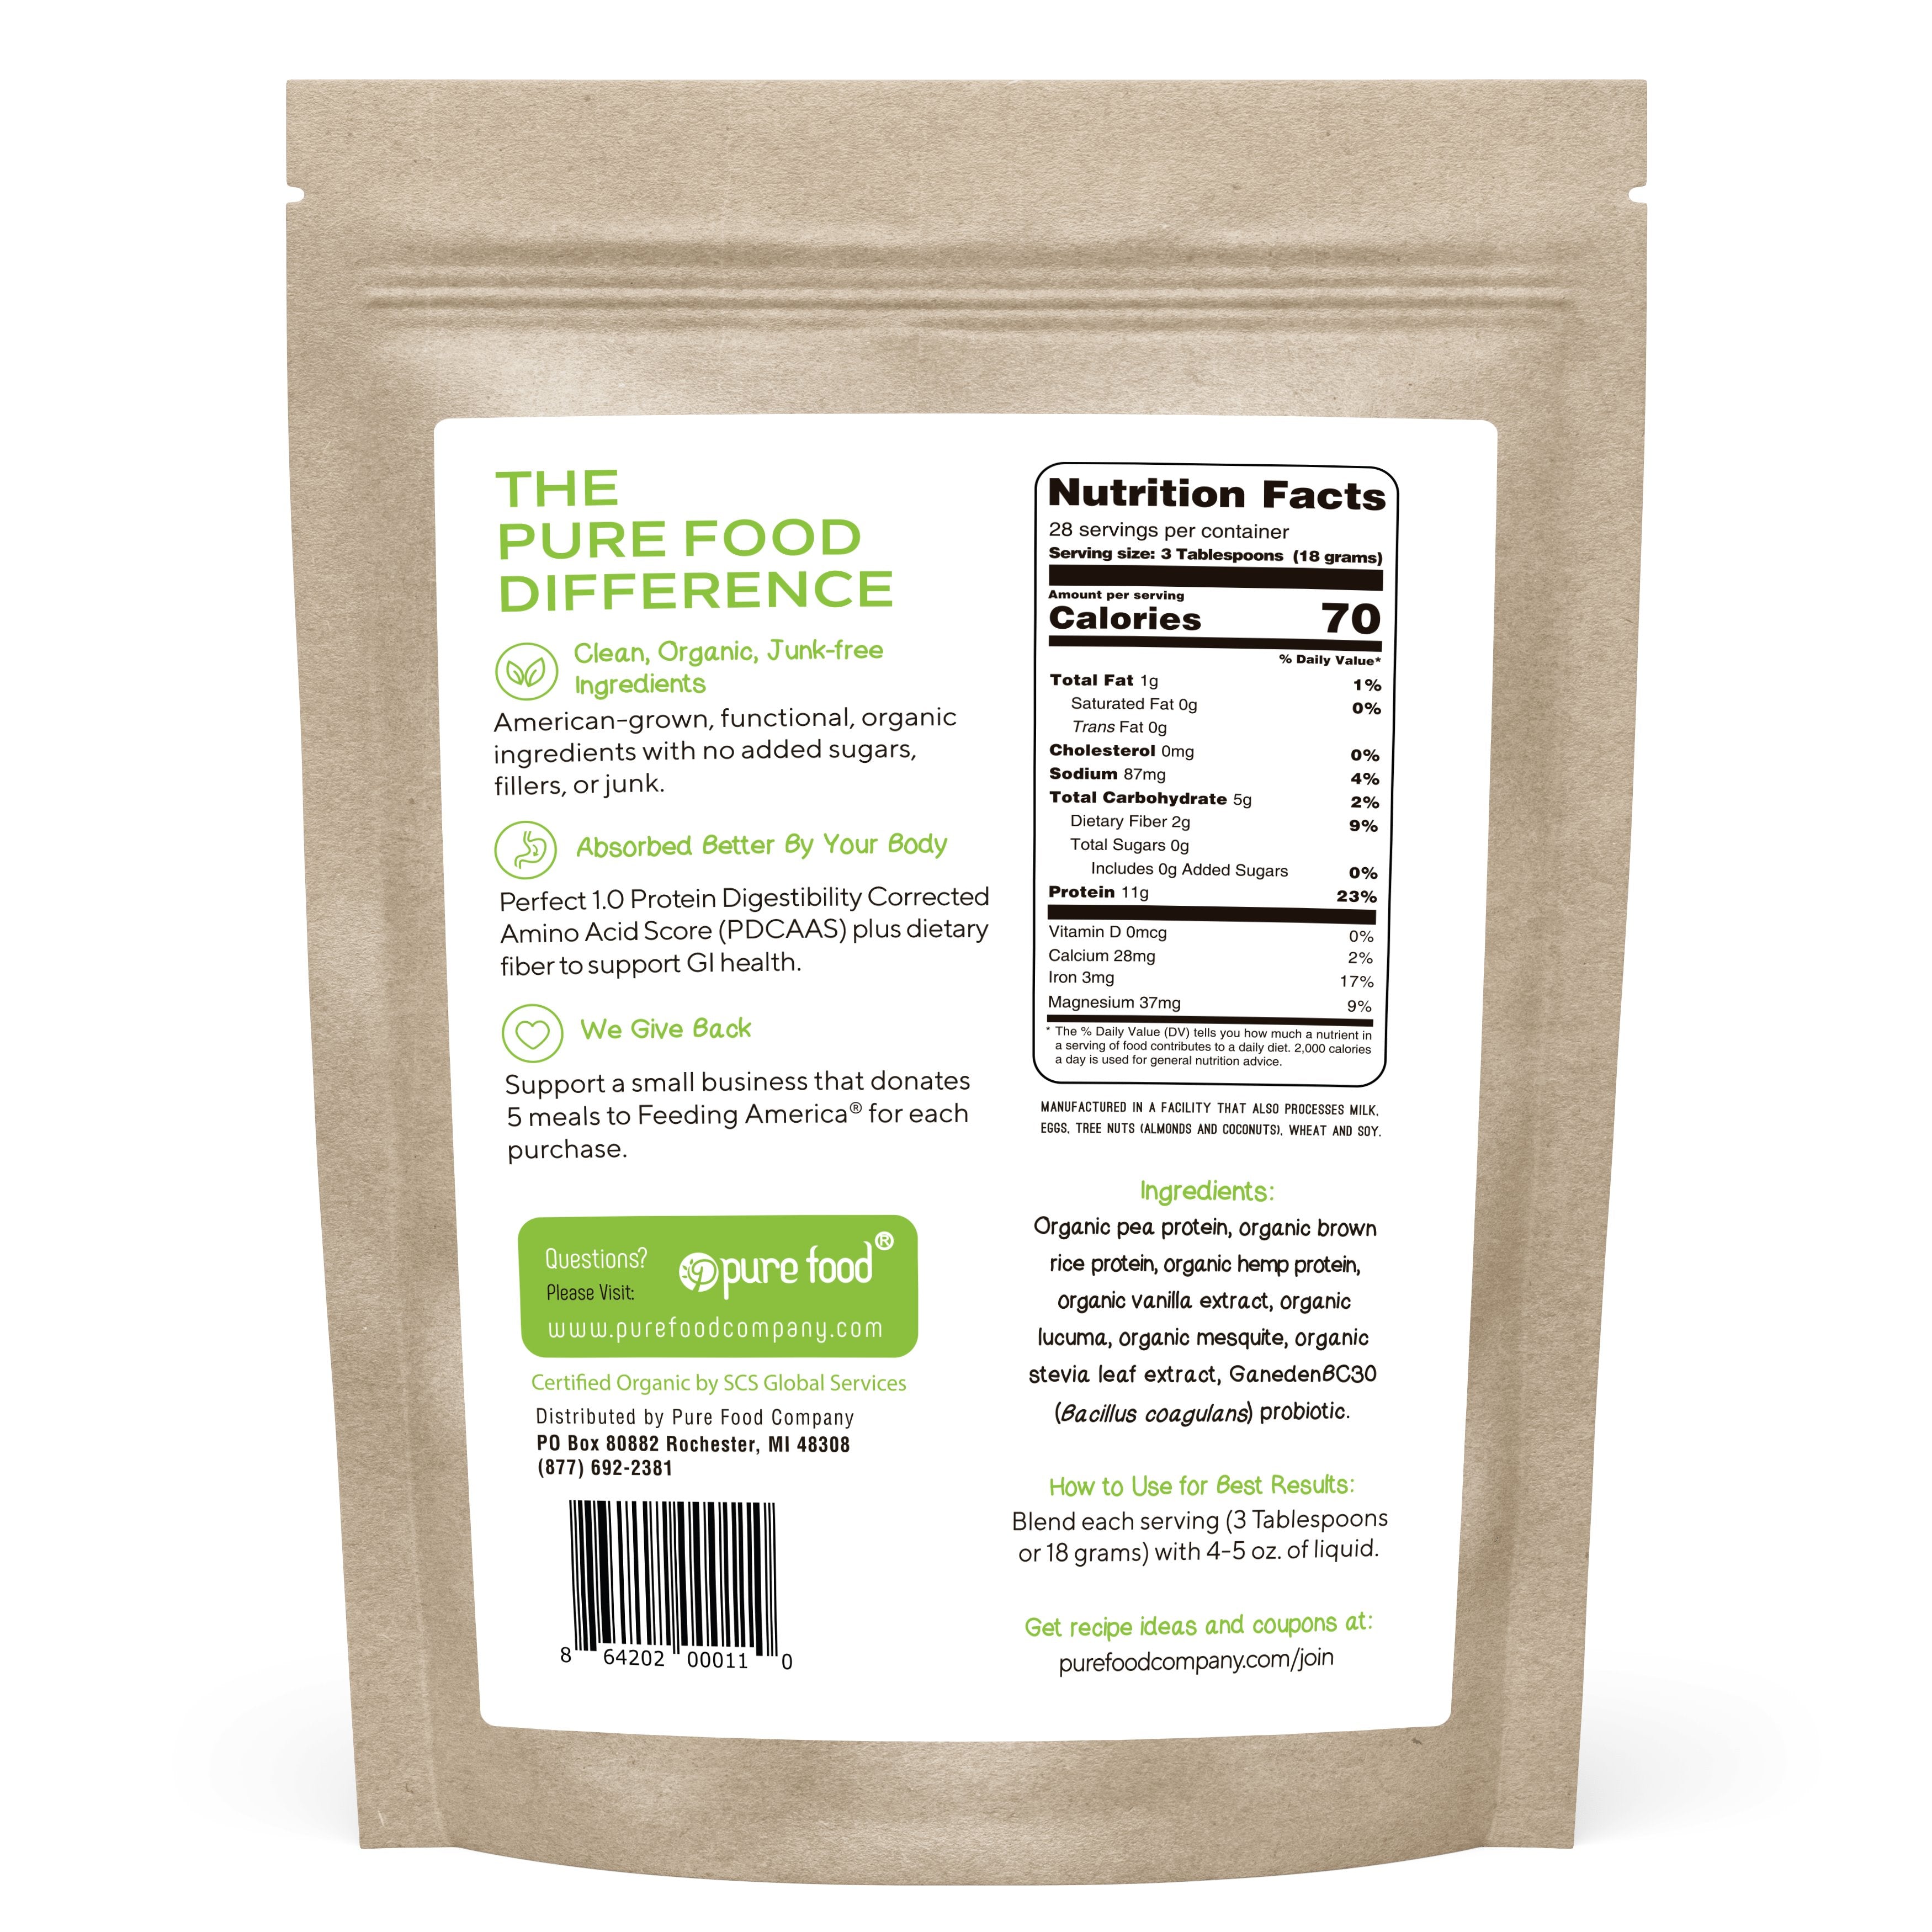 Pure Food Plant Based Protein Powder Bundle Pack: (1) RAW CACAO + (1) VANILLA Subscribe &amp;amp; Save Pure Food Digestive Health 